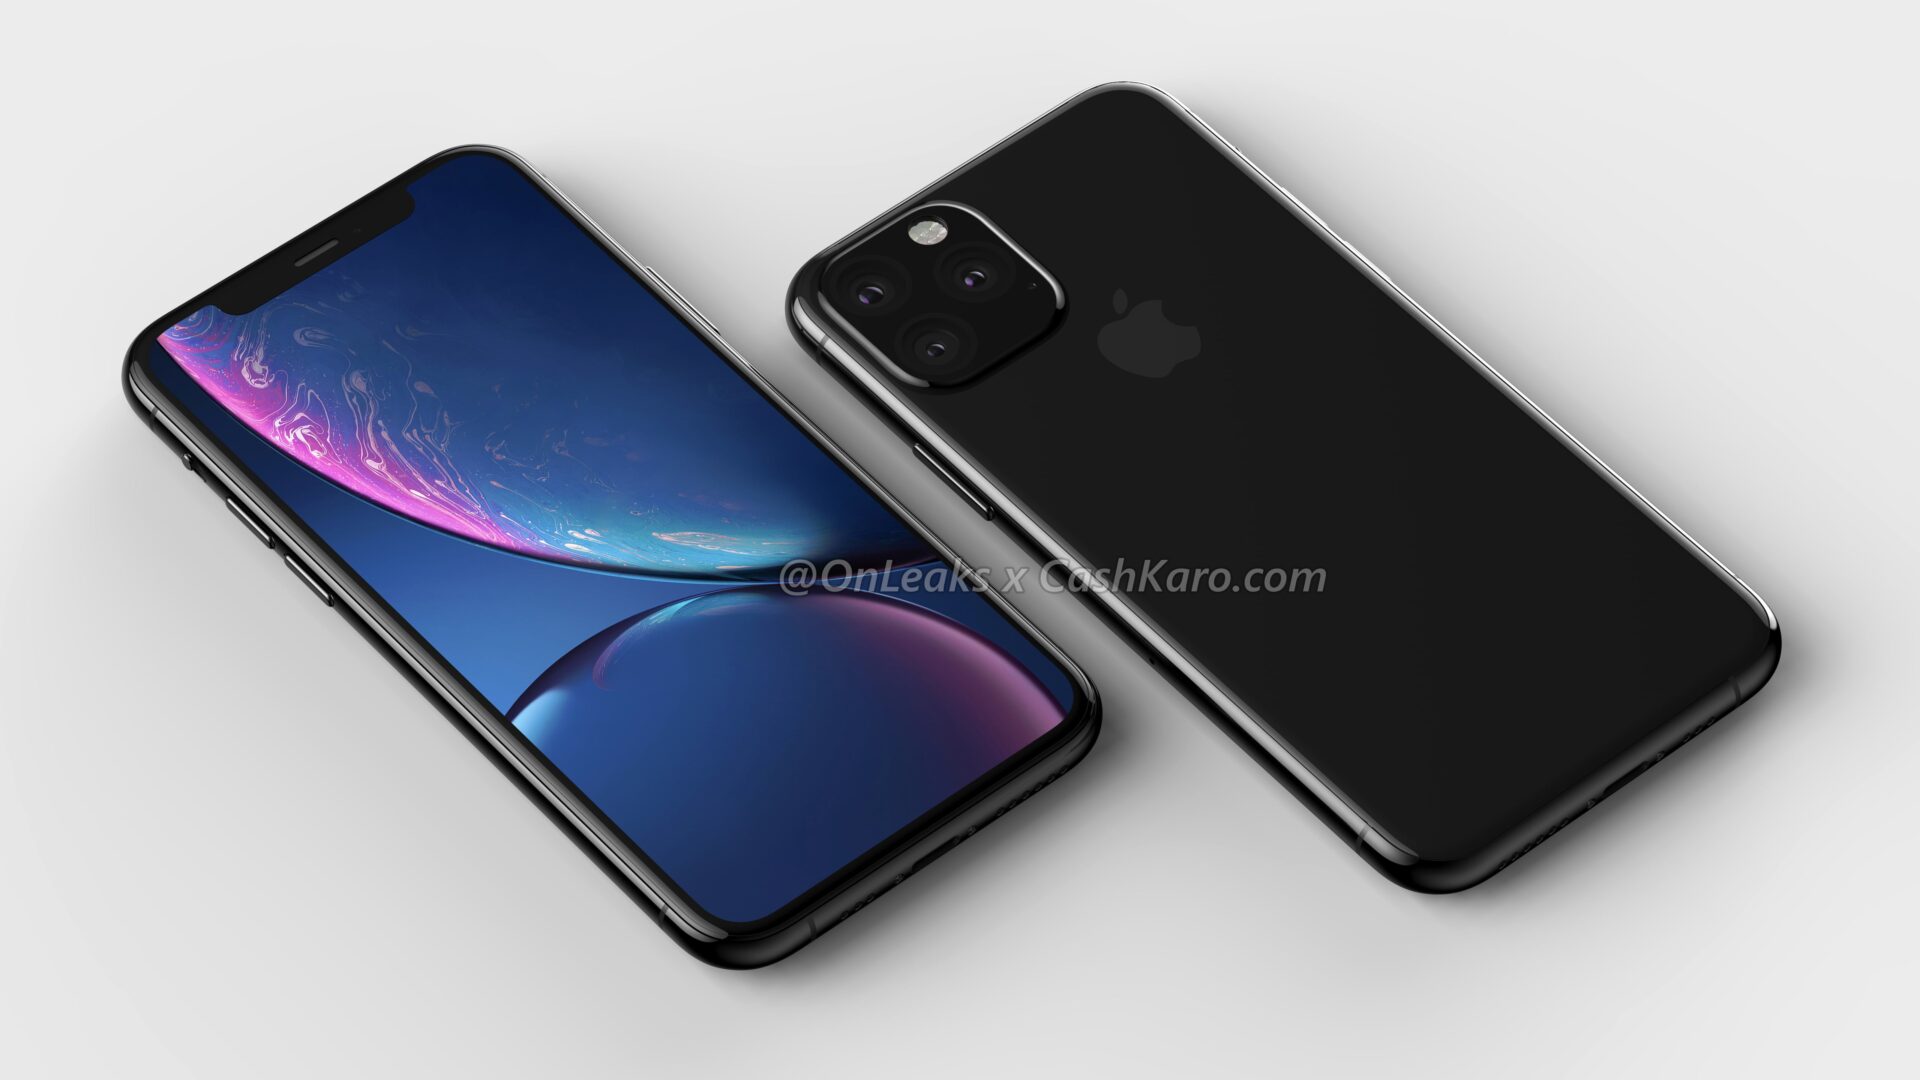 2019 iPhone XI design confirmed in this latest final CAD renders